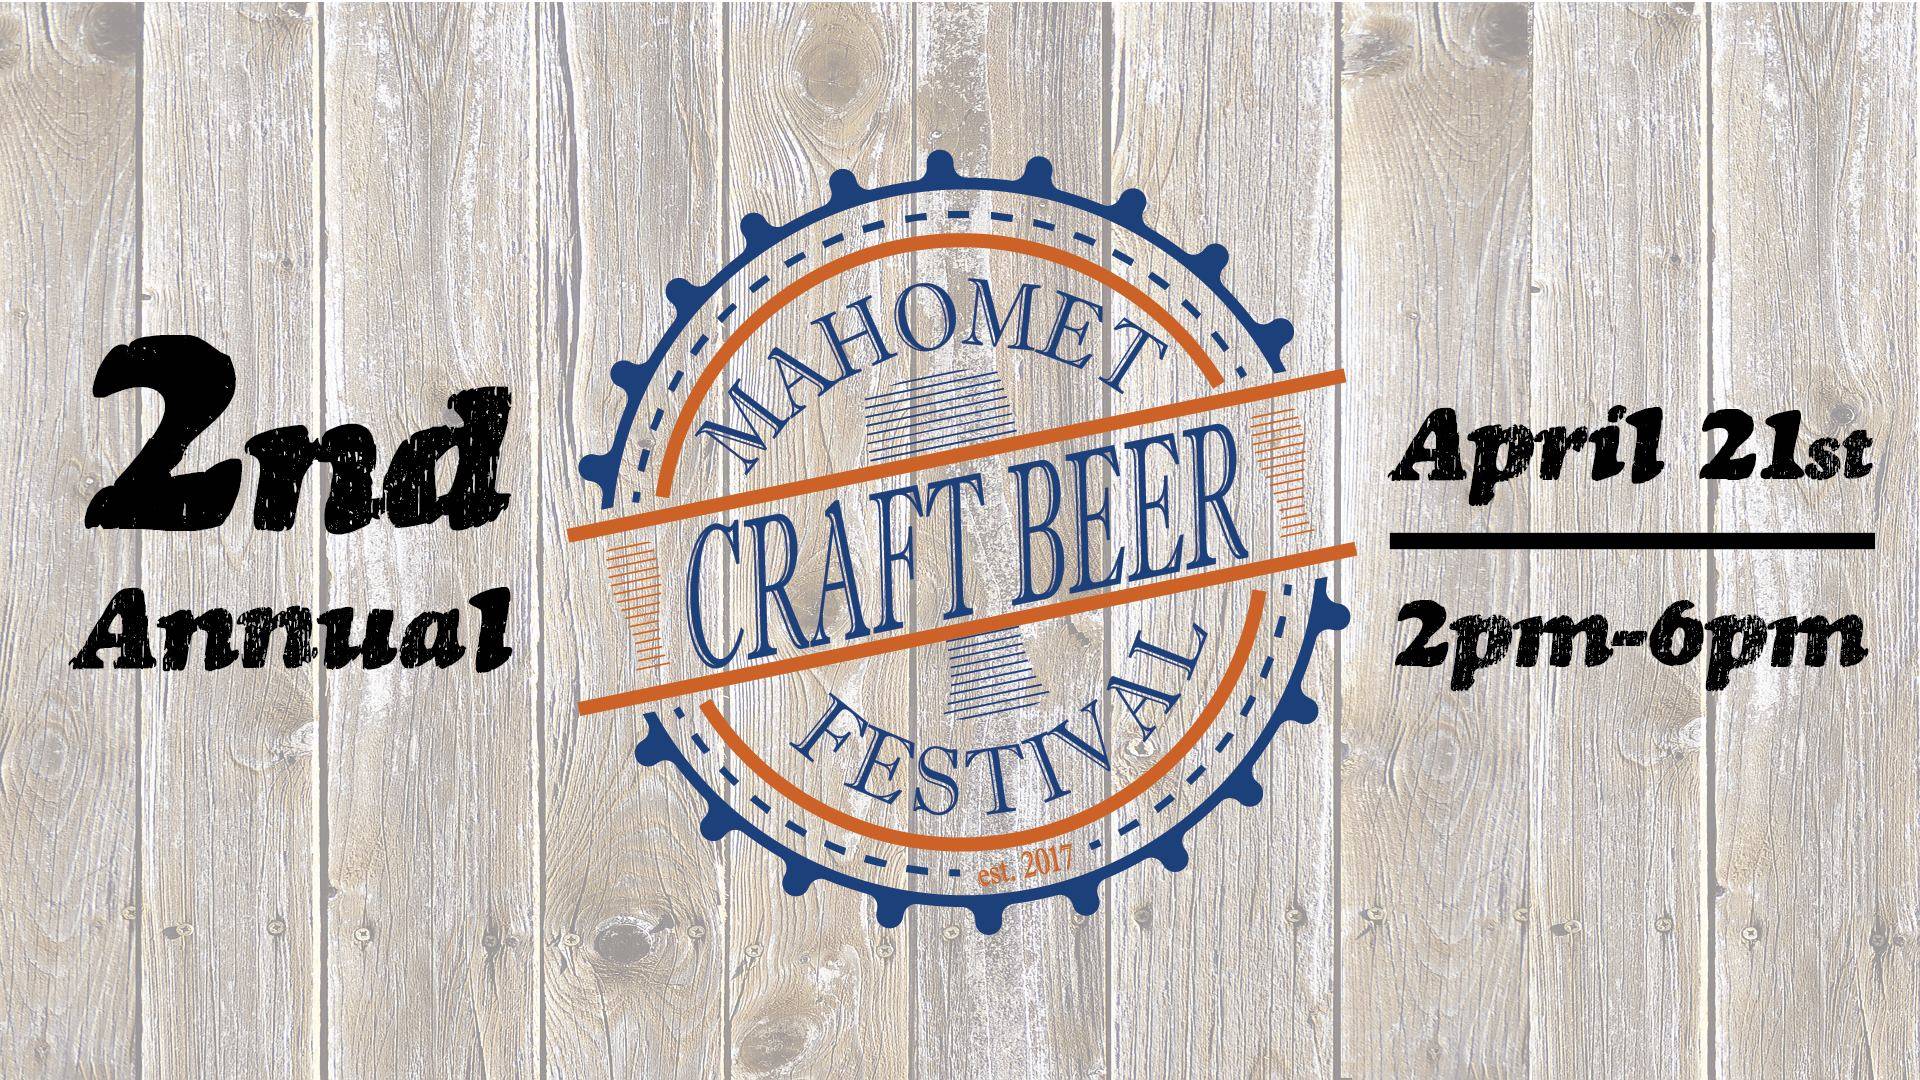 The 2nd Annual Mahomet Beer Festival, in review